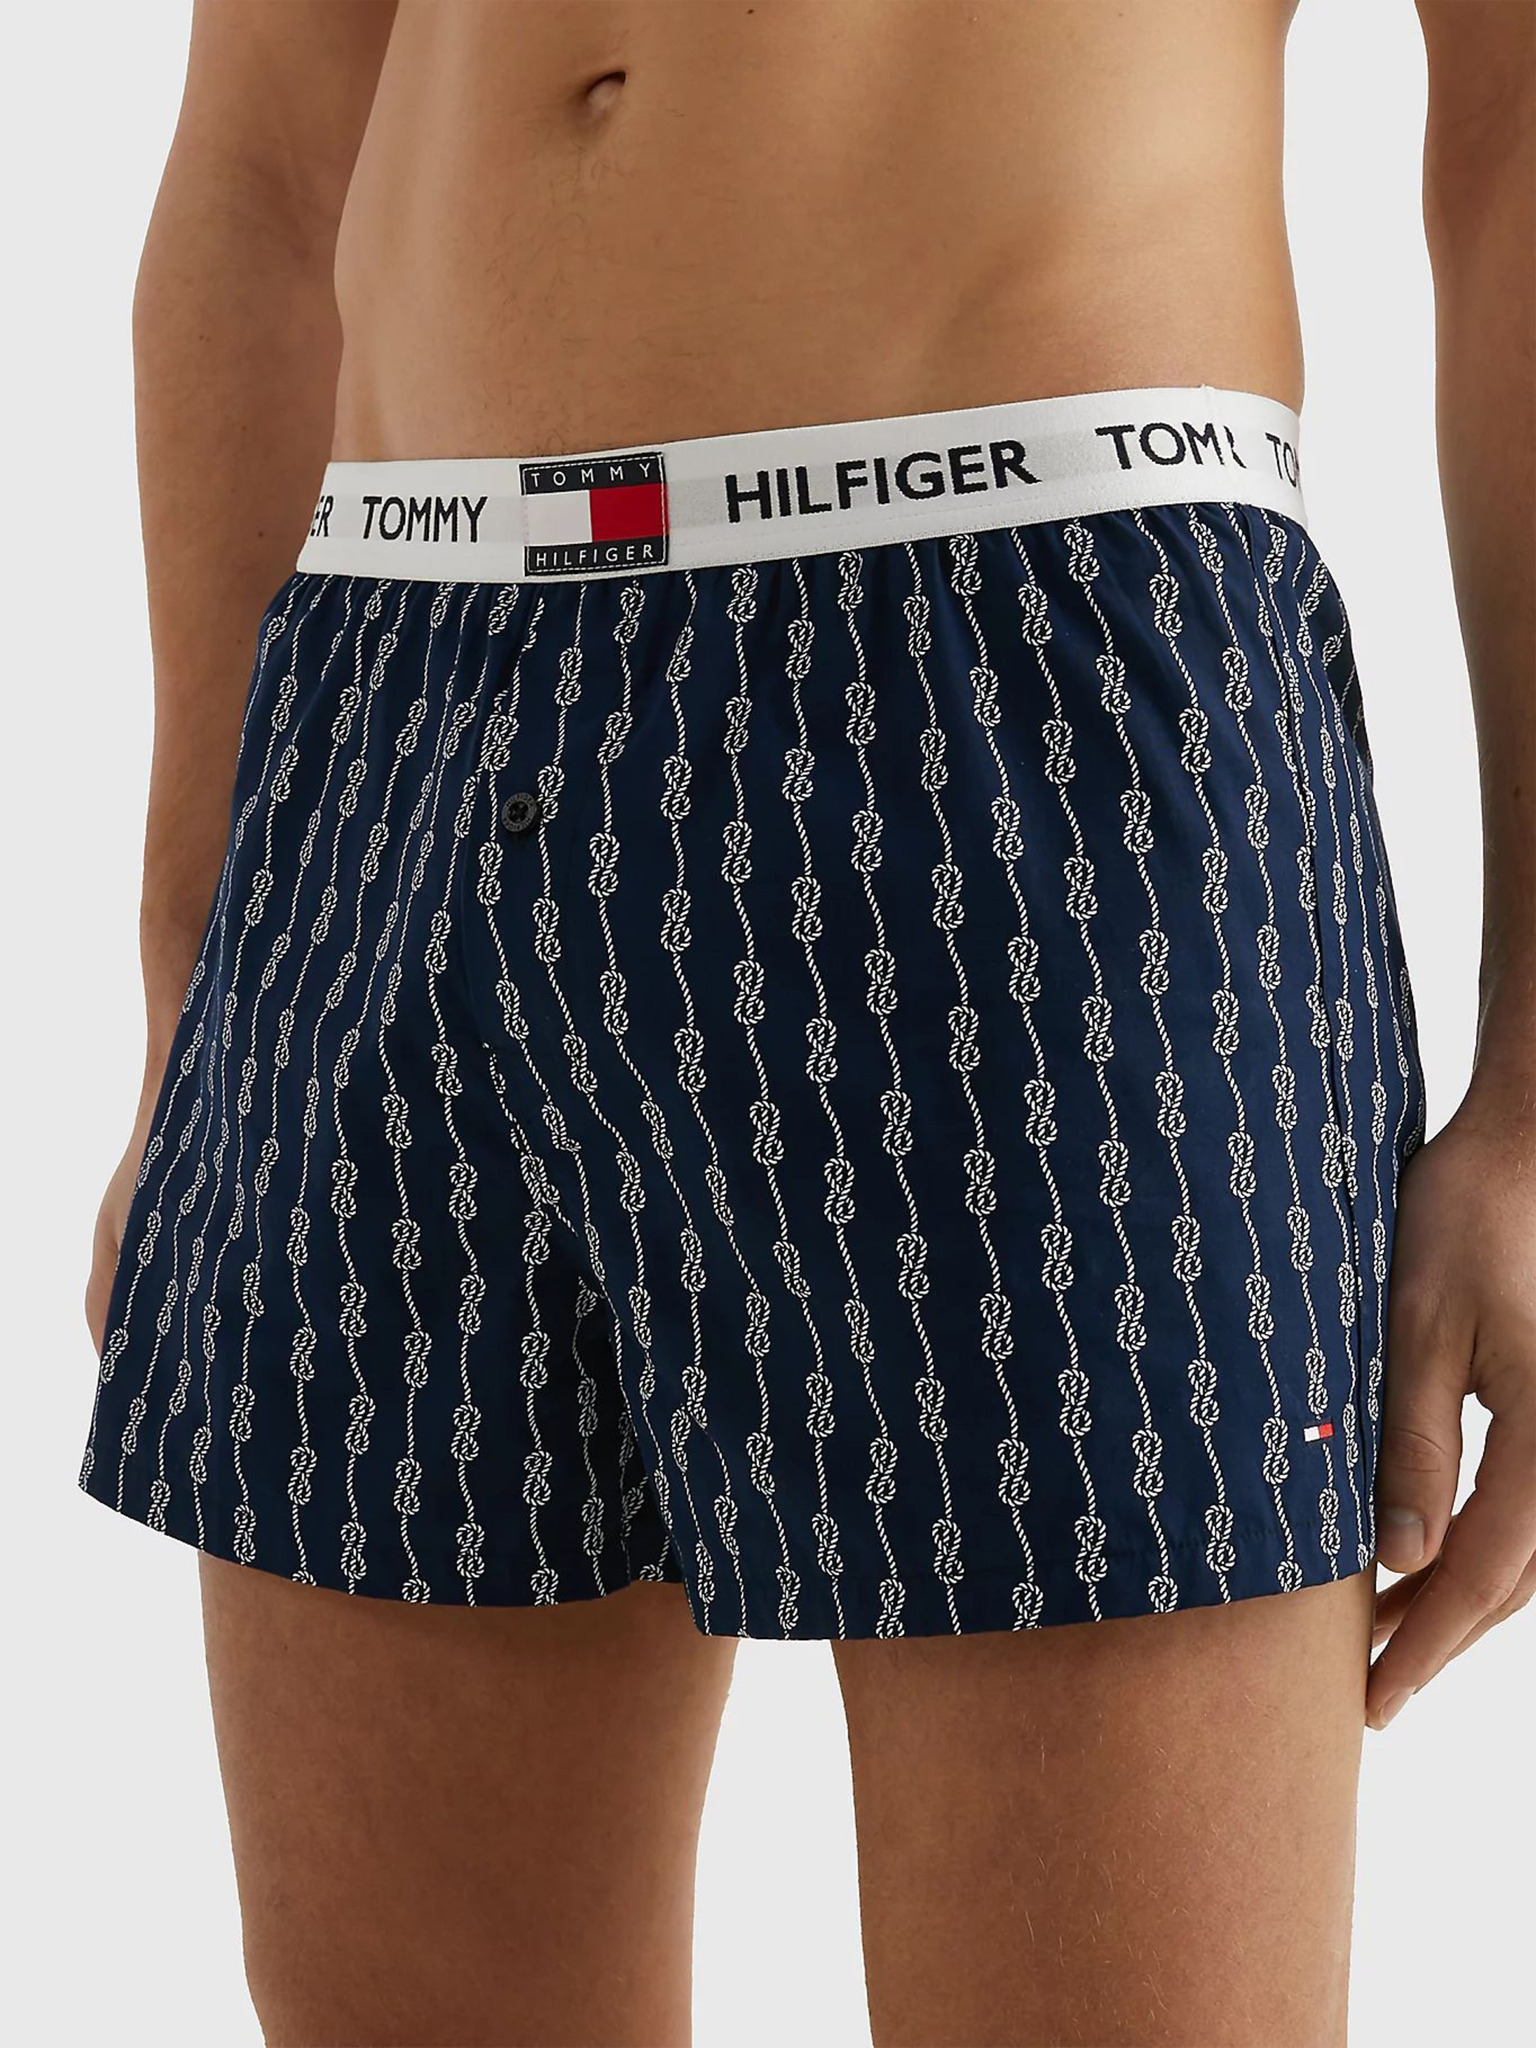 Tommy Hilfiger - Tommy 85 Woven Boxer Print Boxer shorts